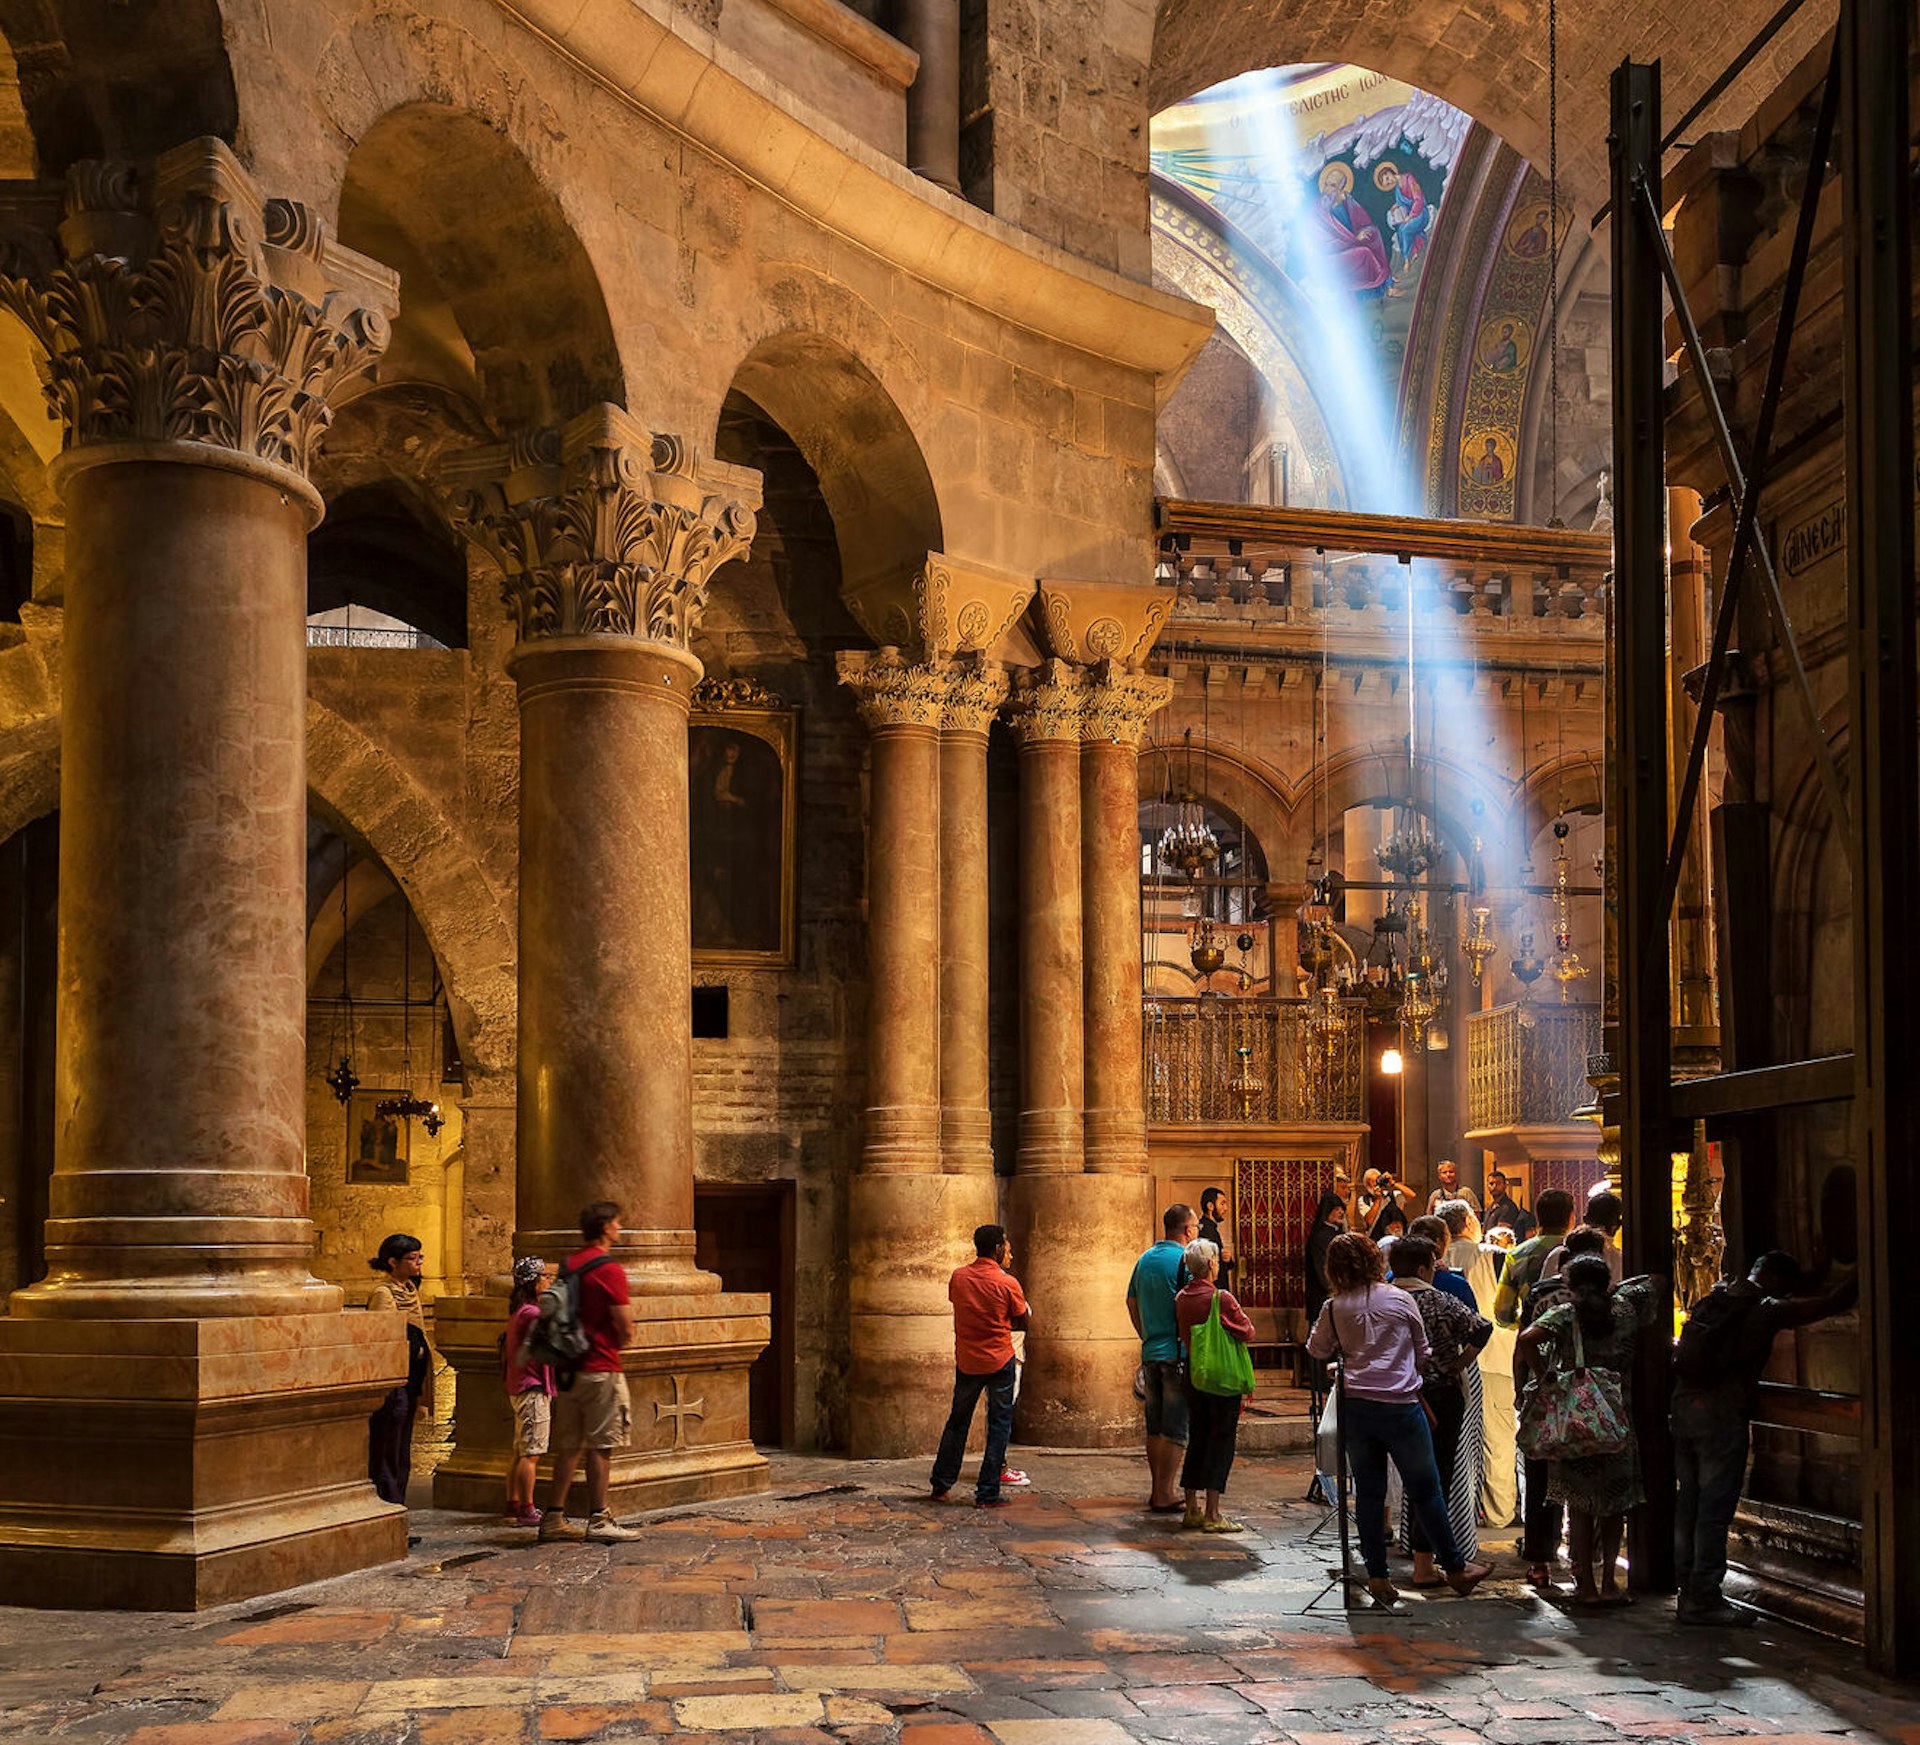 People inside Church of the Holy Sepulchre in Jerusalem, the place where according Christian tradition Jesus Christ was crucified, buried and resurrected. © Rostislav Glinsky / Shutterstock